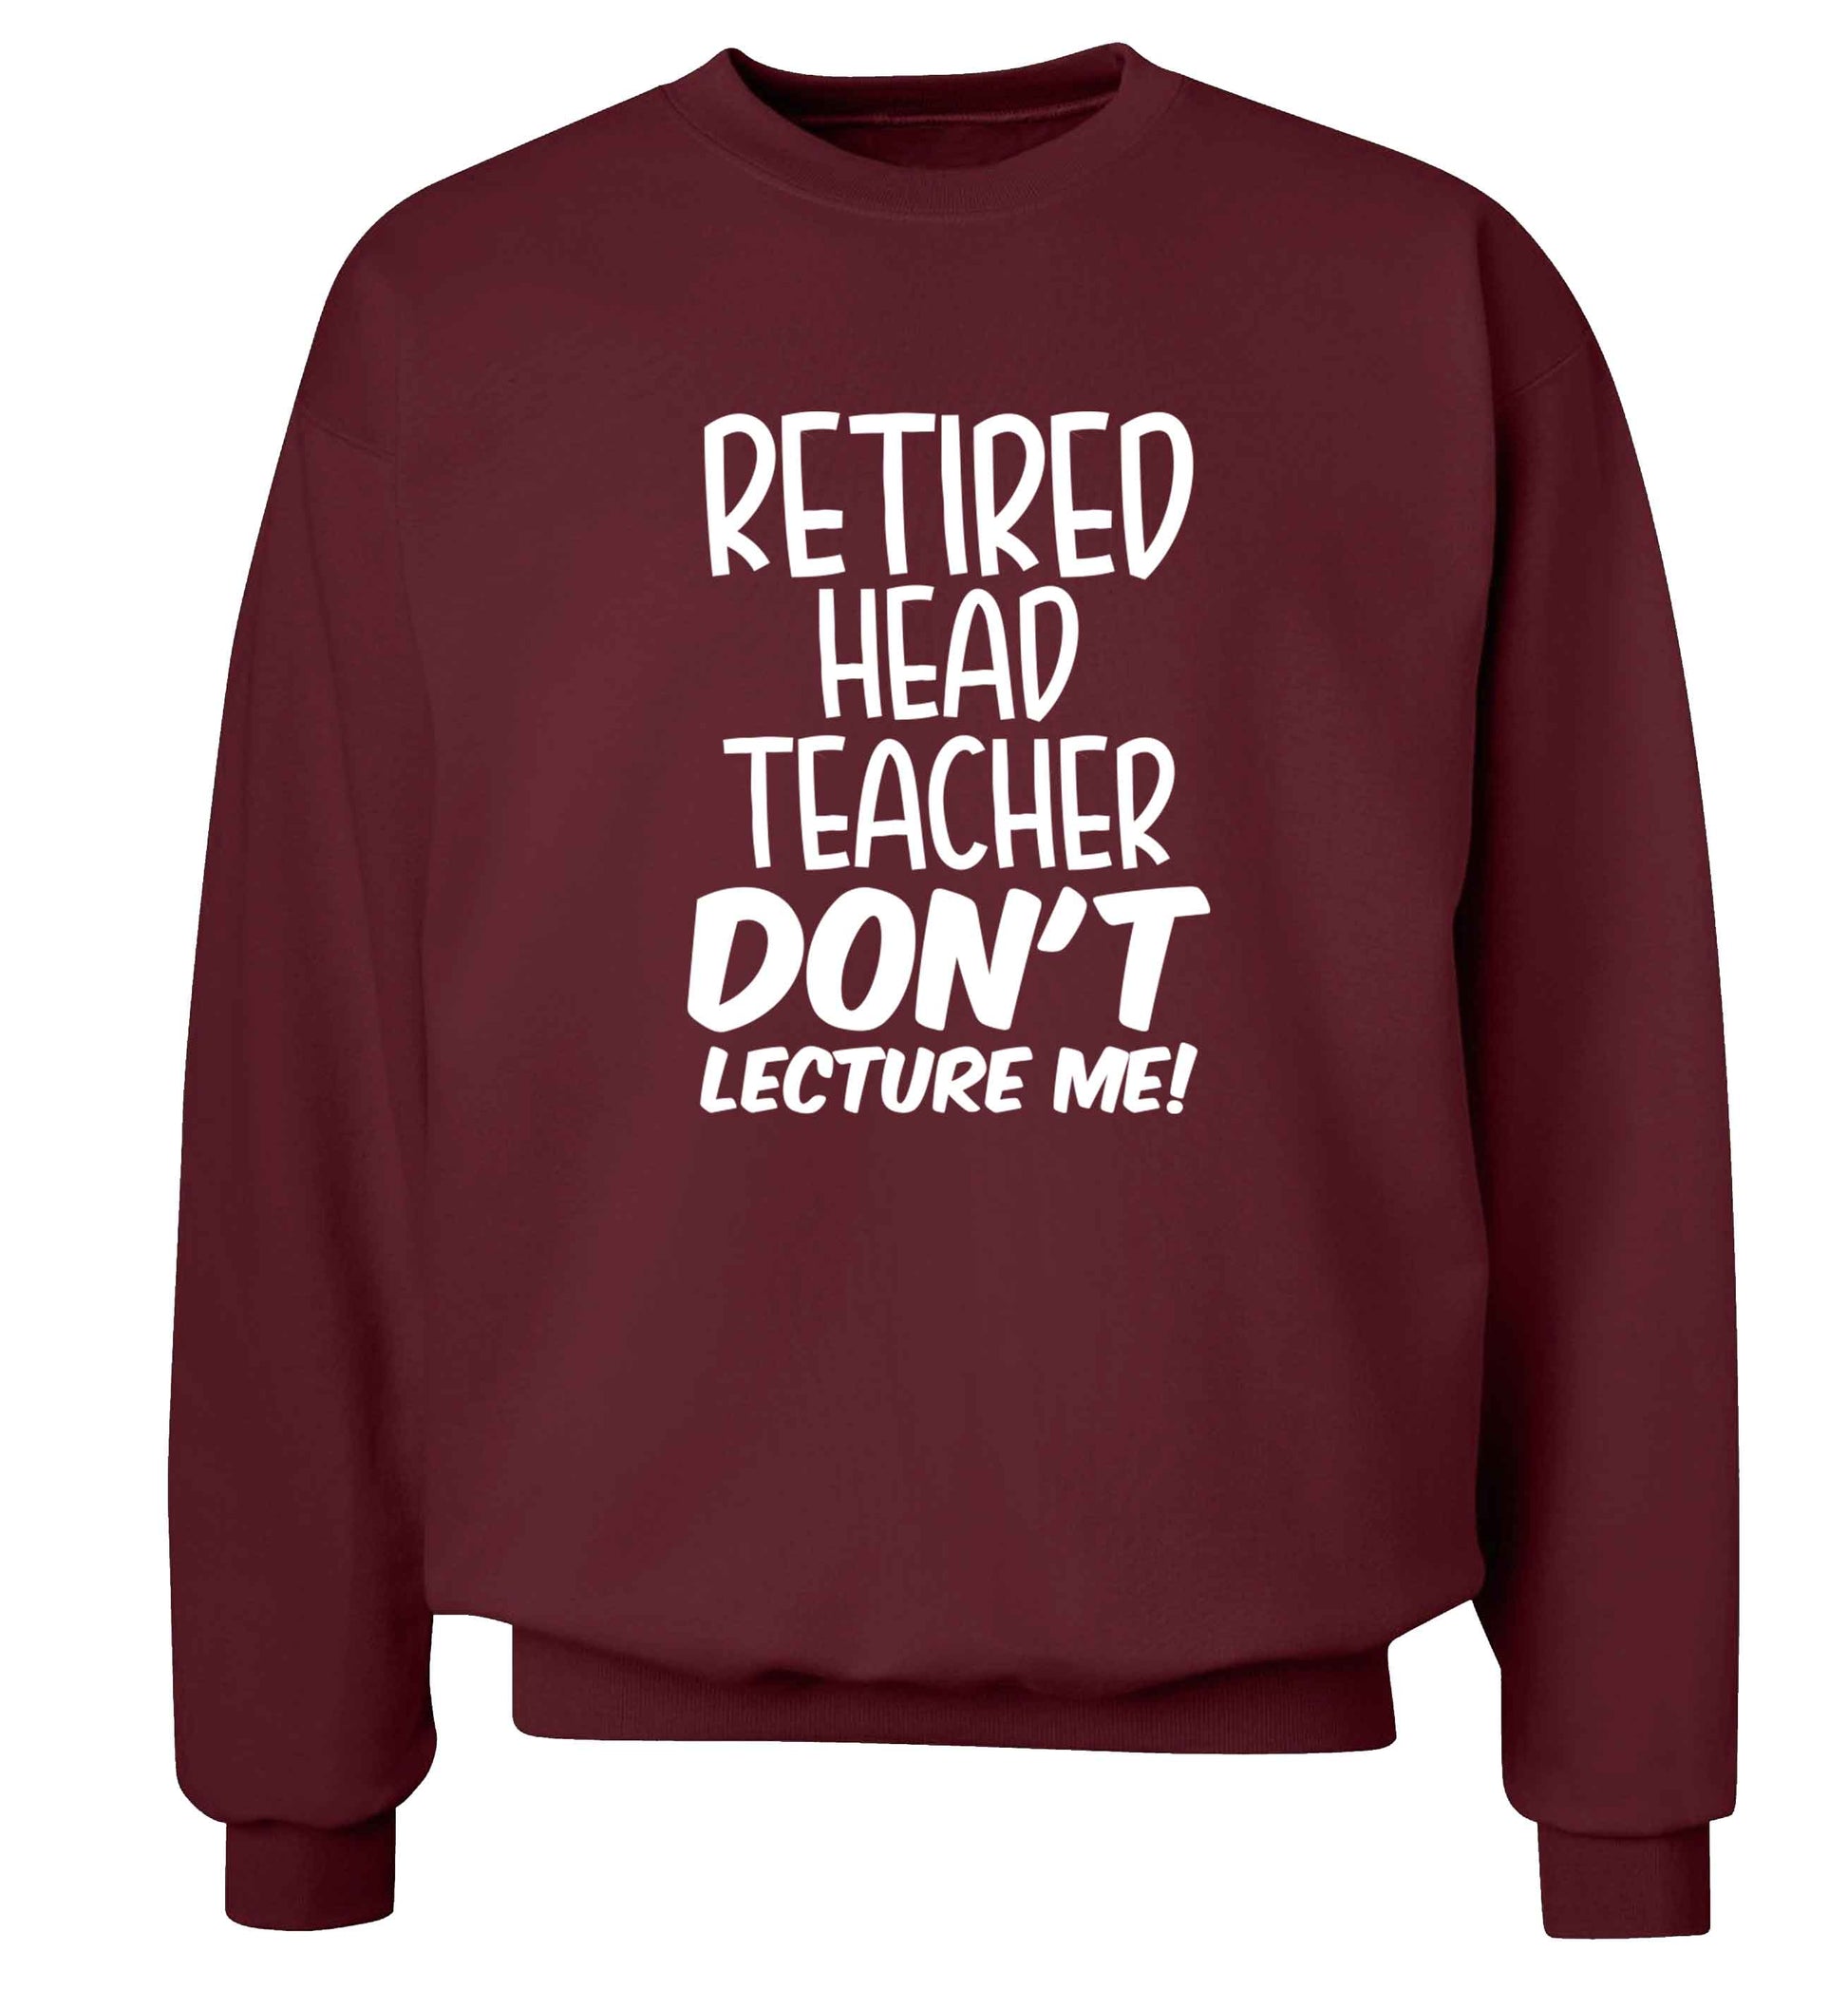 Retired head teacher don't lecture me! Adult's unisex maroon Sweater 2XL